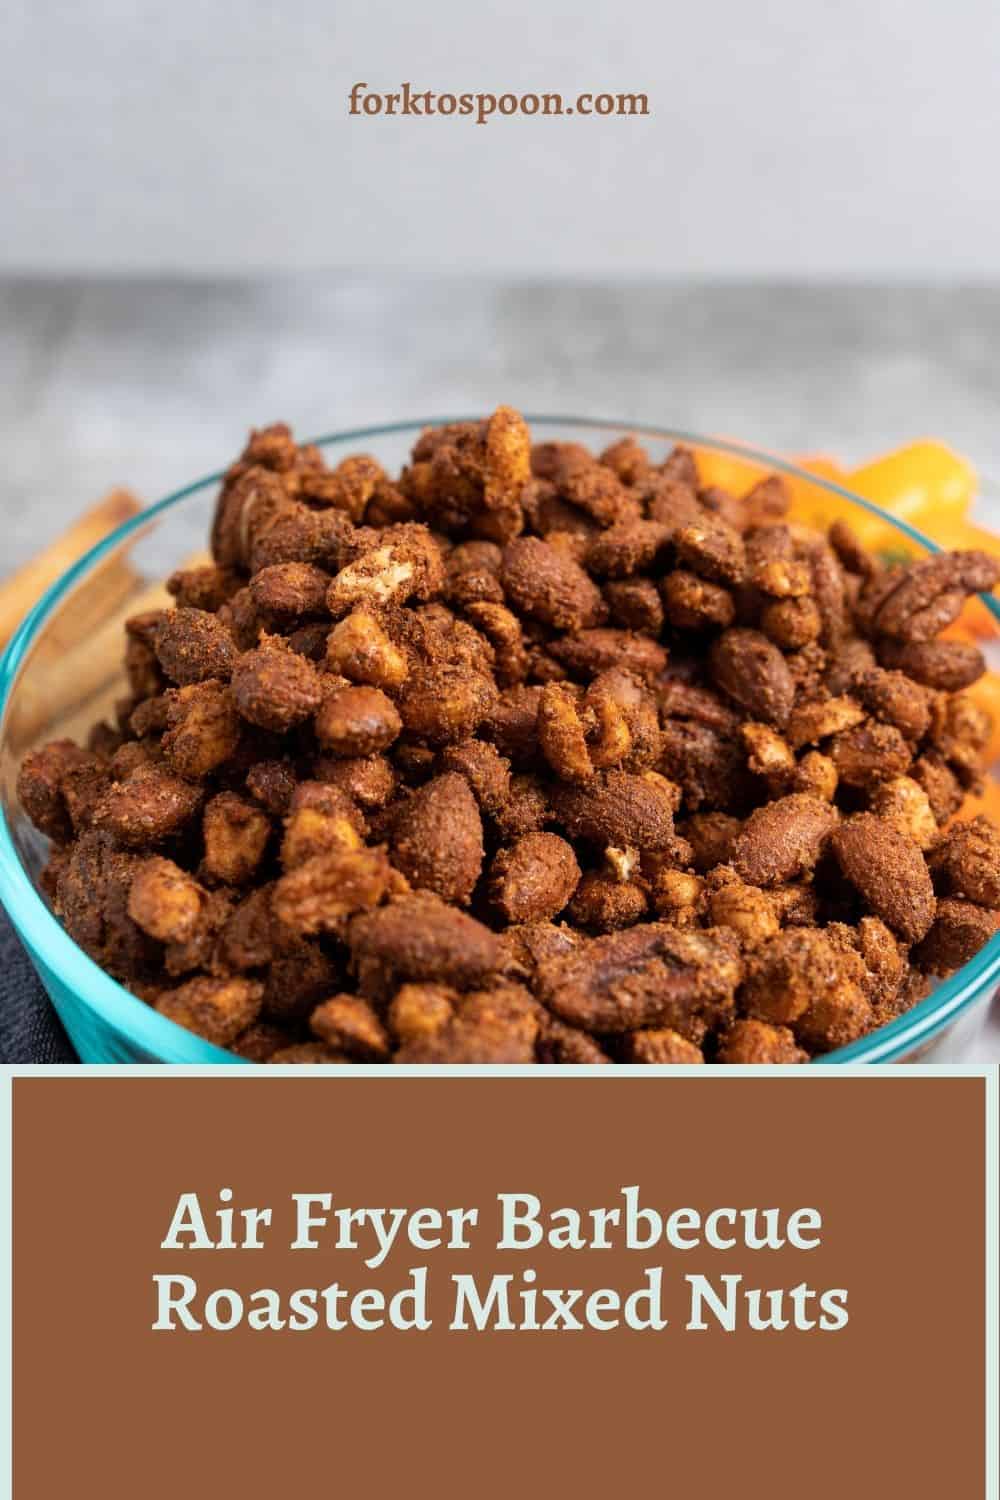 Air Fryer Barbecue Roasted Mixed Nuts - Fork To Spoon